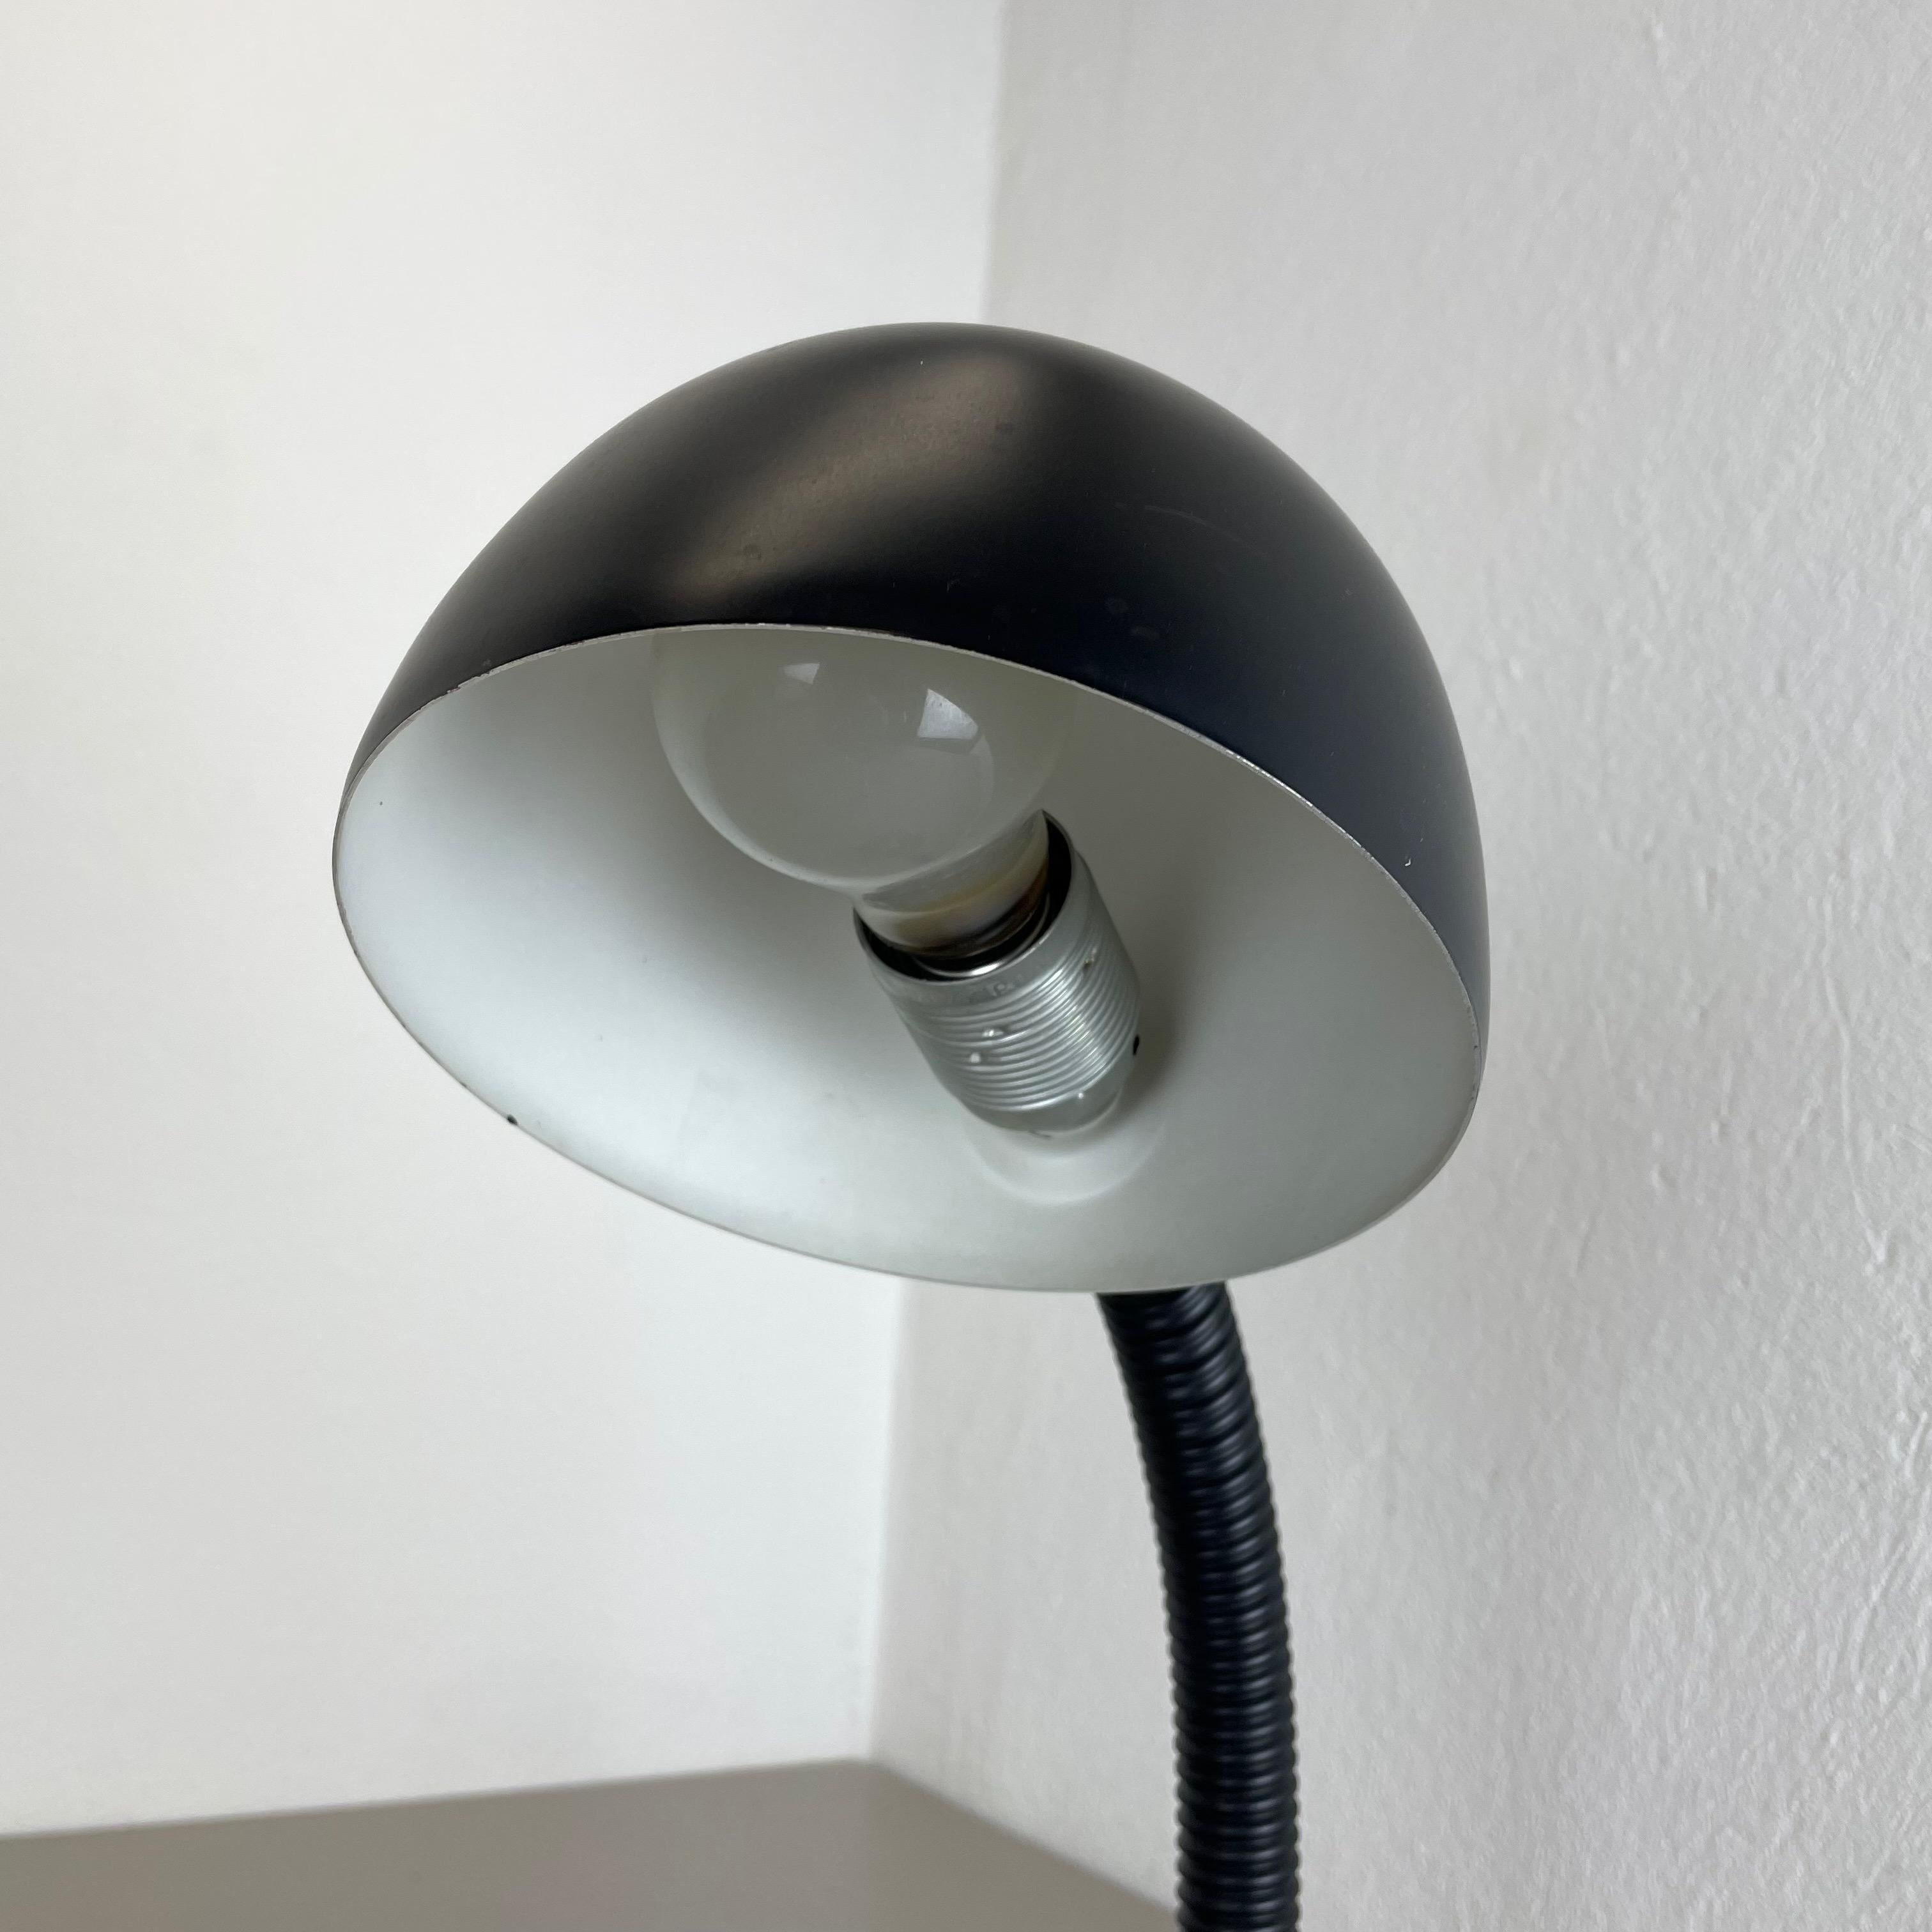 Modernist SPACE AGE Metal Table Light by Hillebrand Leuchten, Germany, 1970s For Sale 2